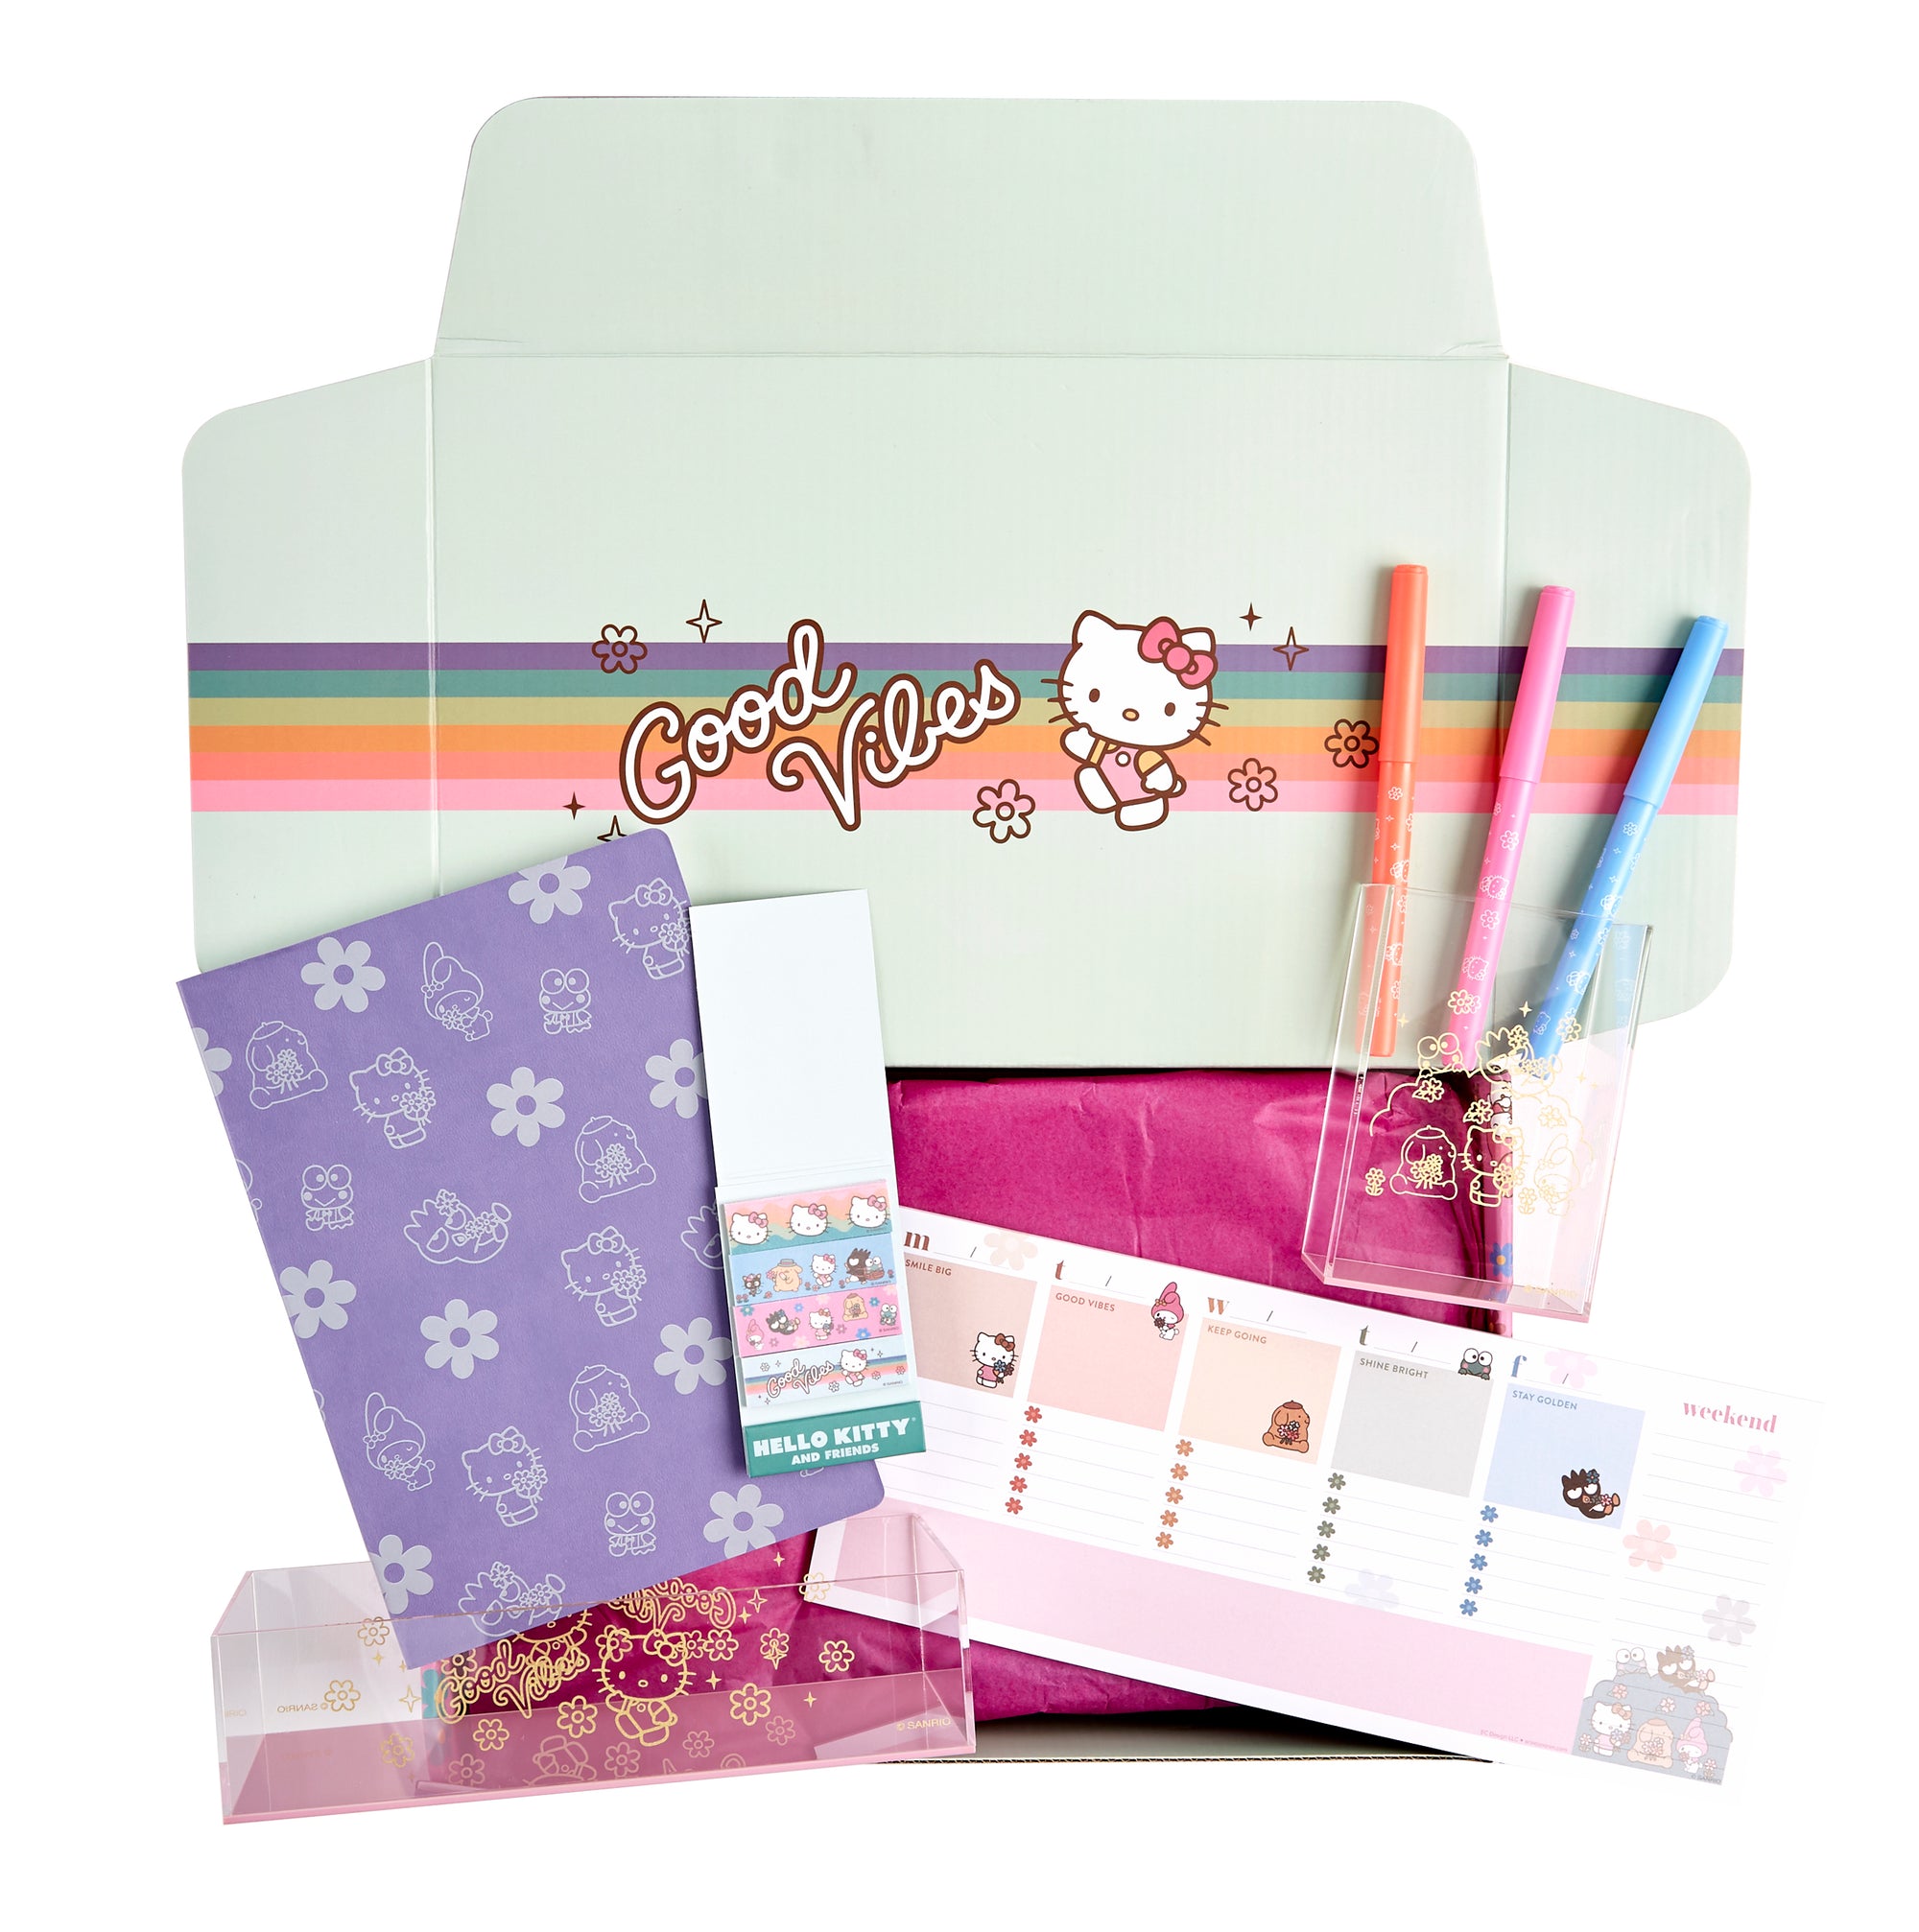 Hello Kitty And Friends x Pipsticks Let It Snow Sticker Sheet